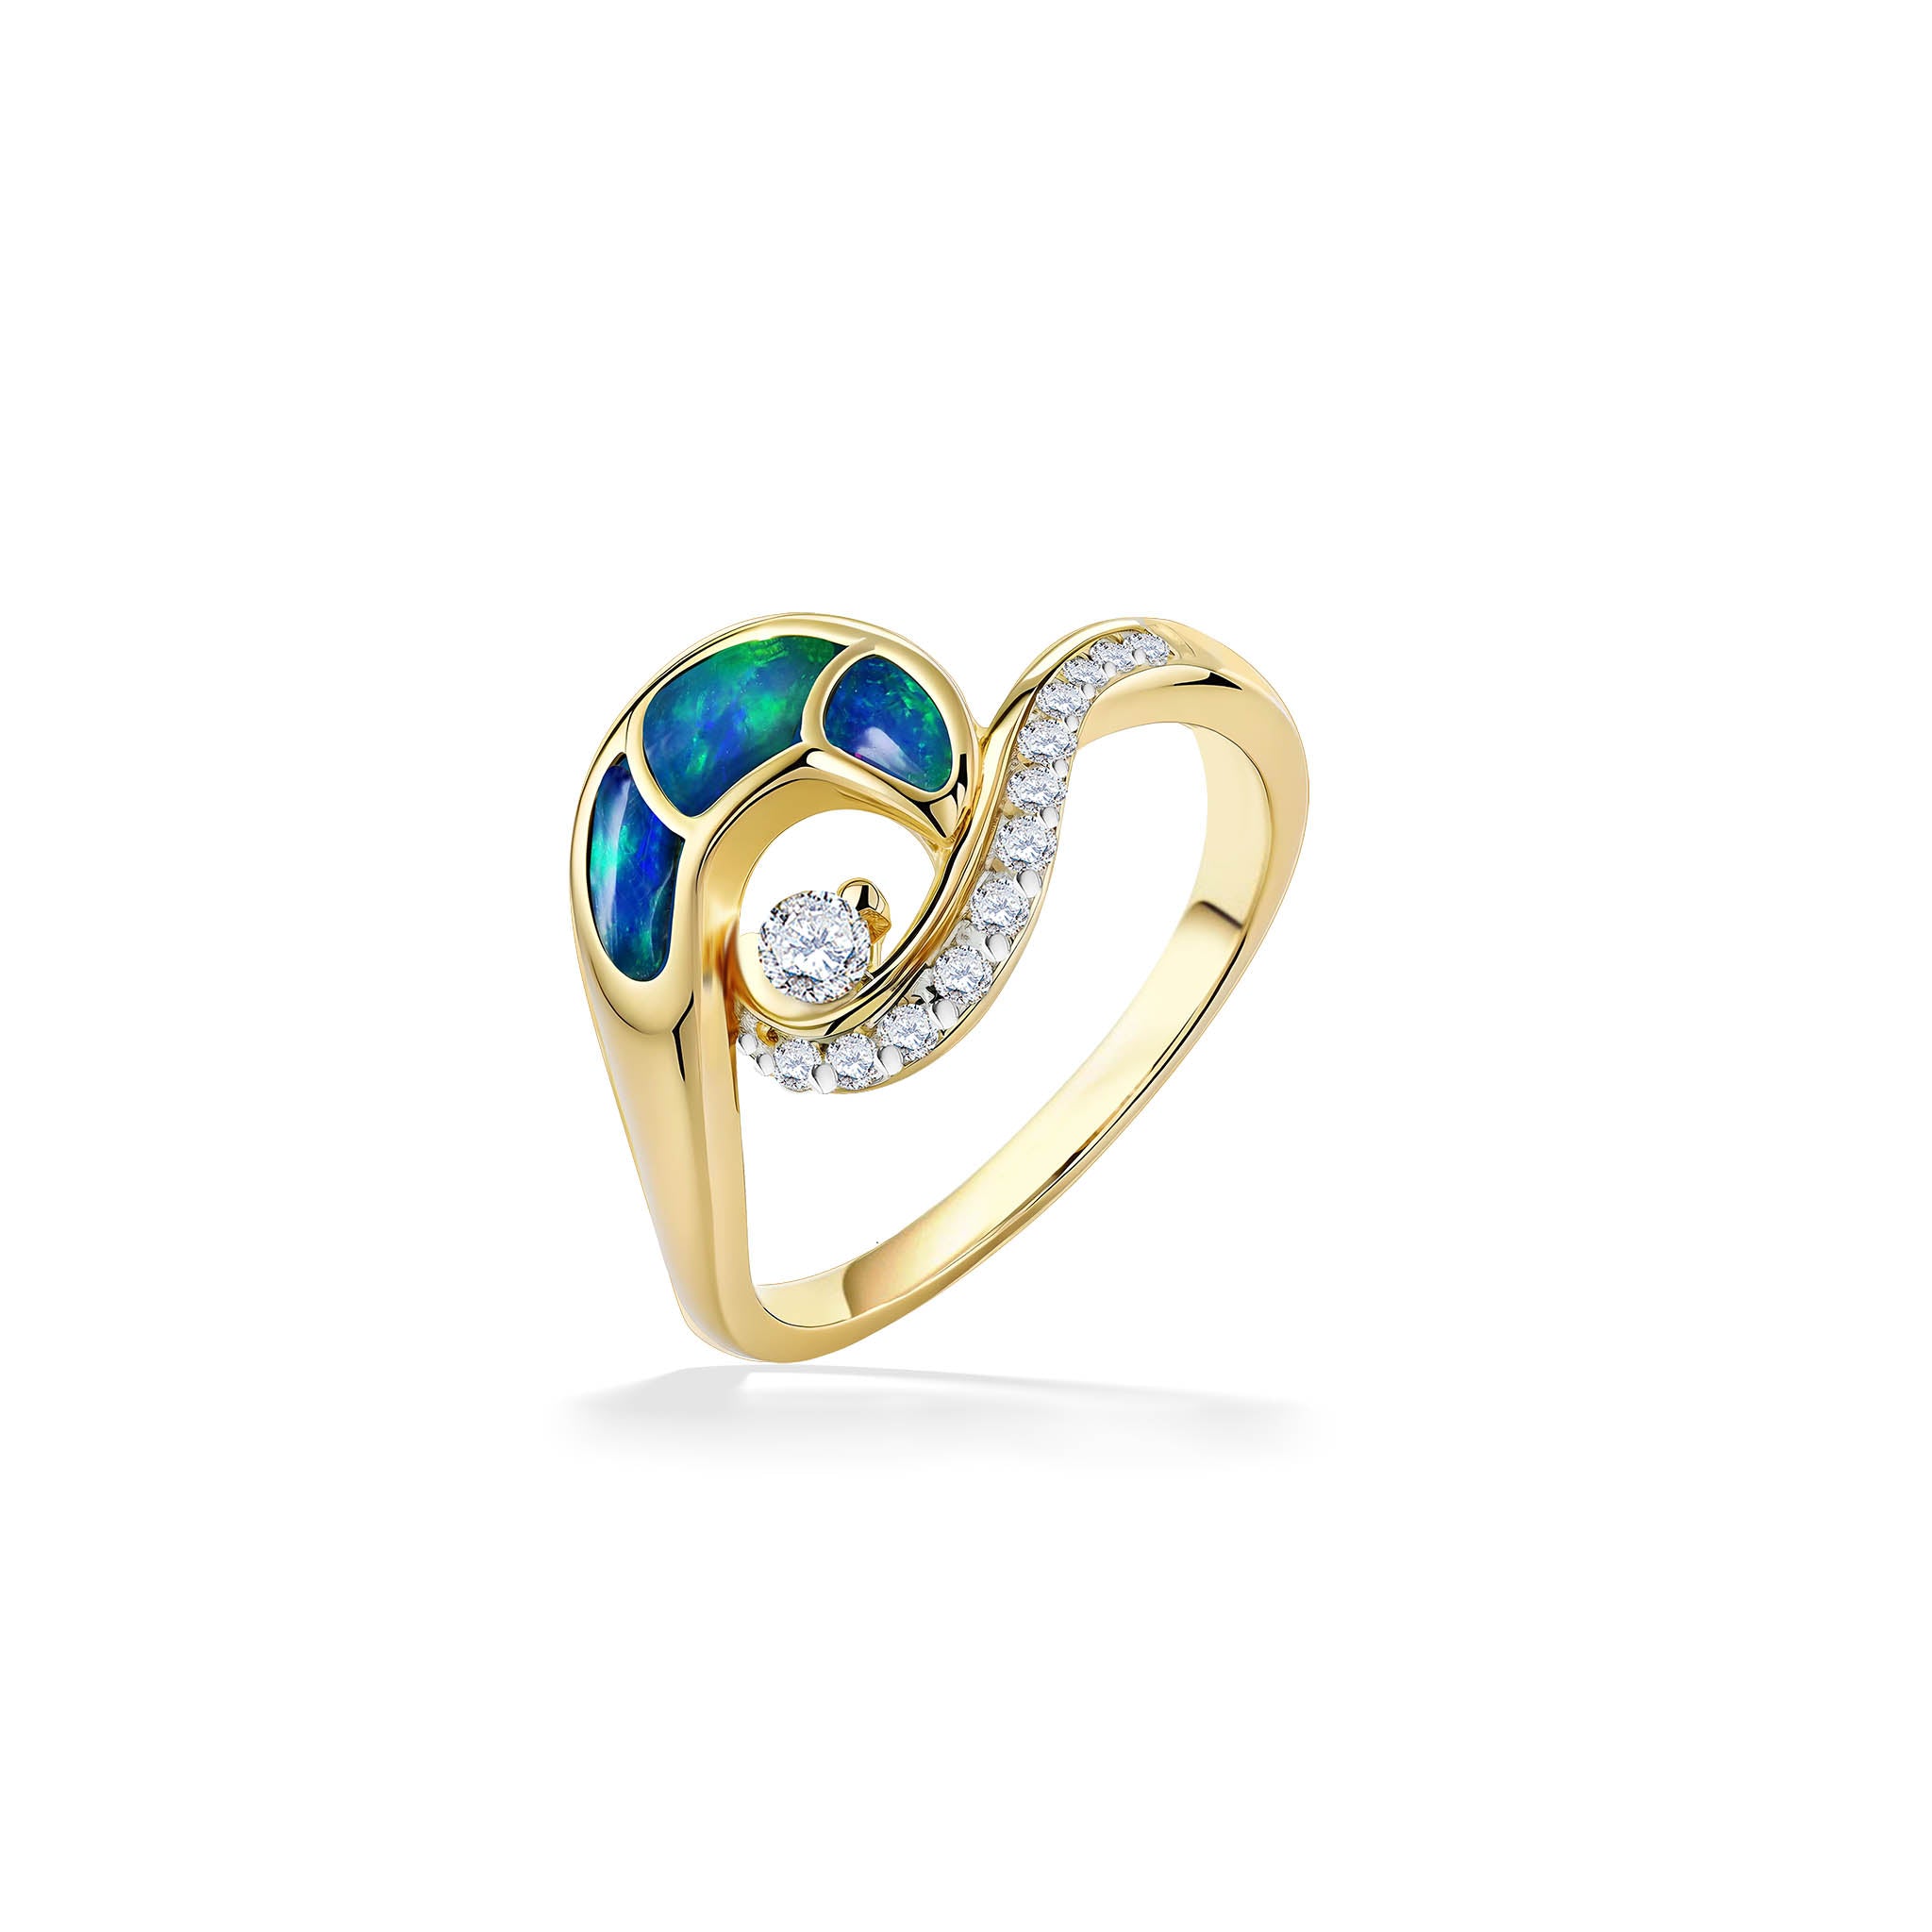 22K Gold Peacock Ring (4.15) - Queen of Hearts Jewelry